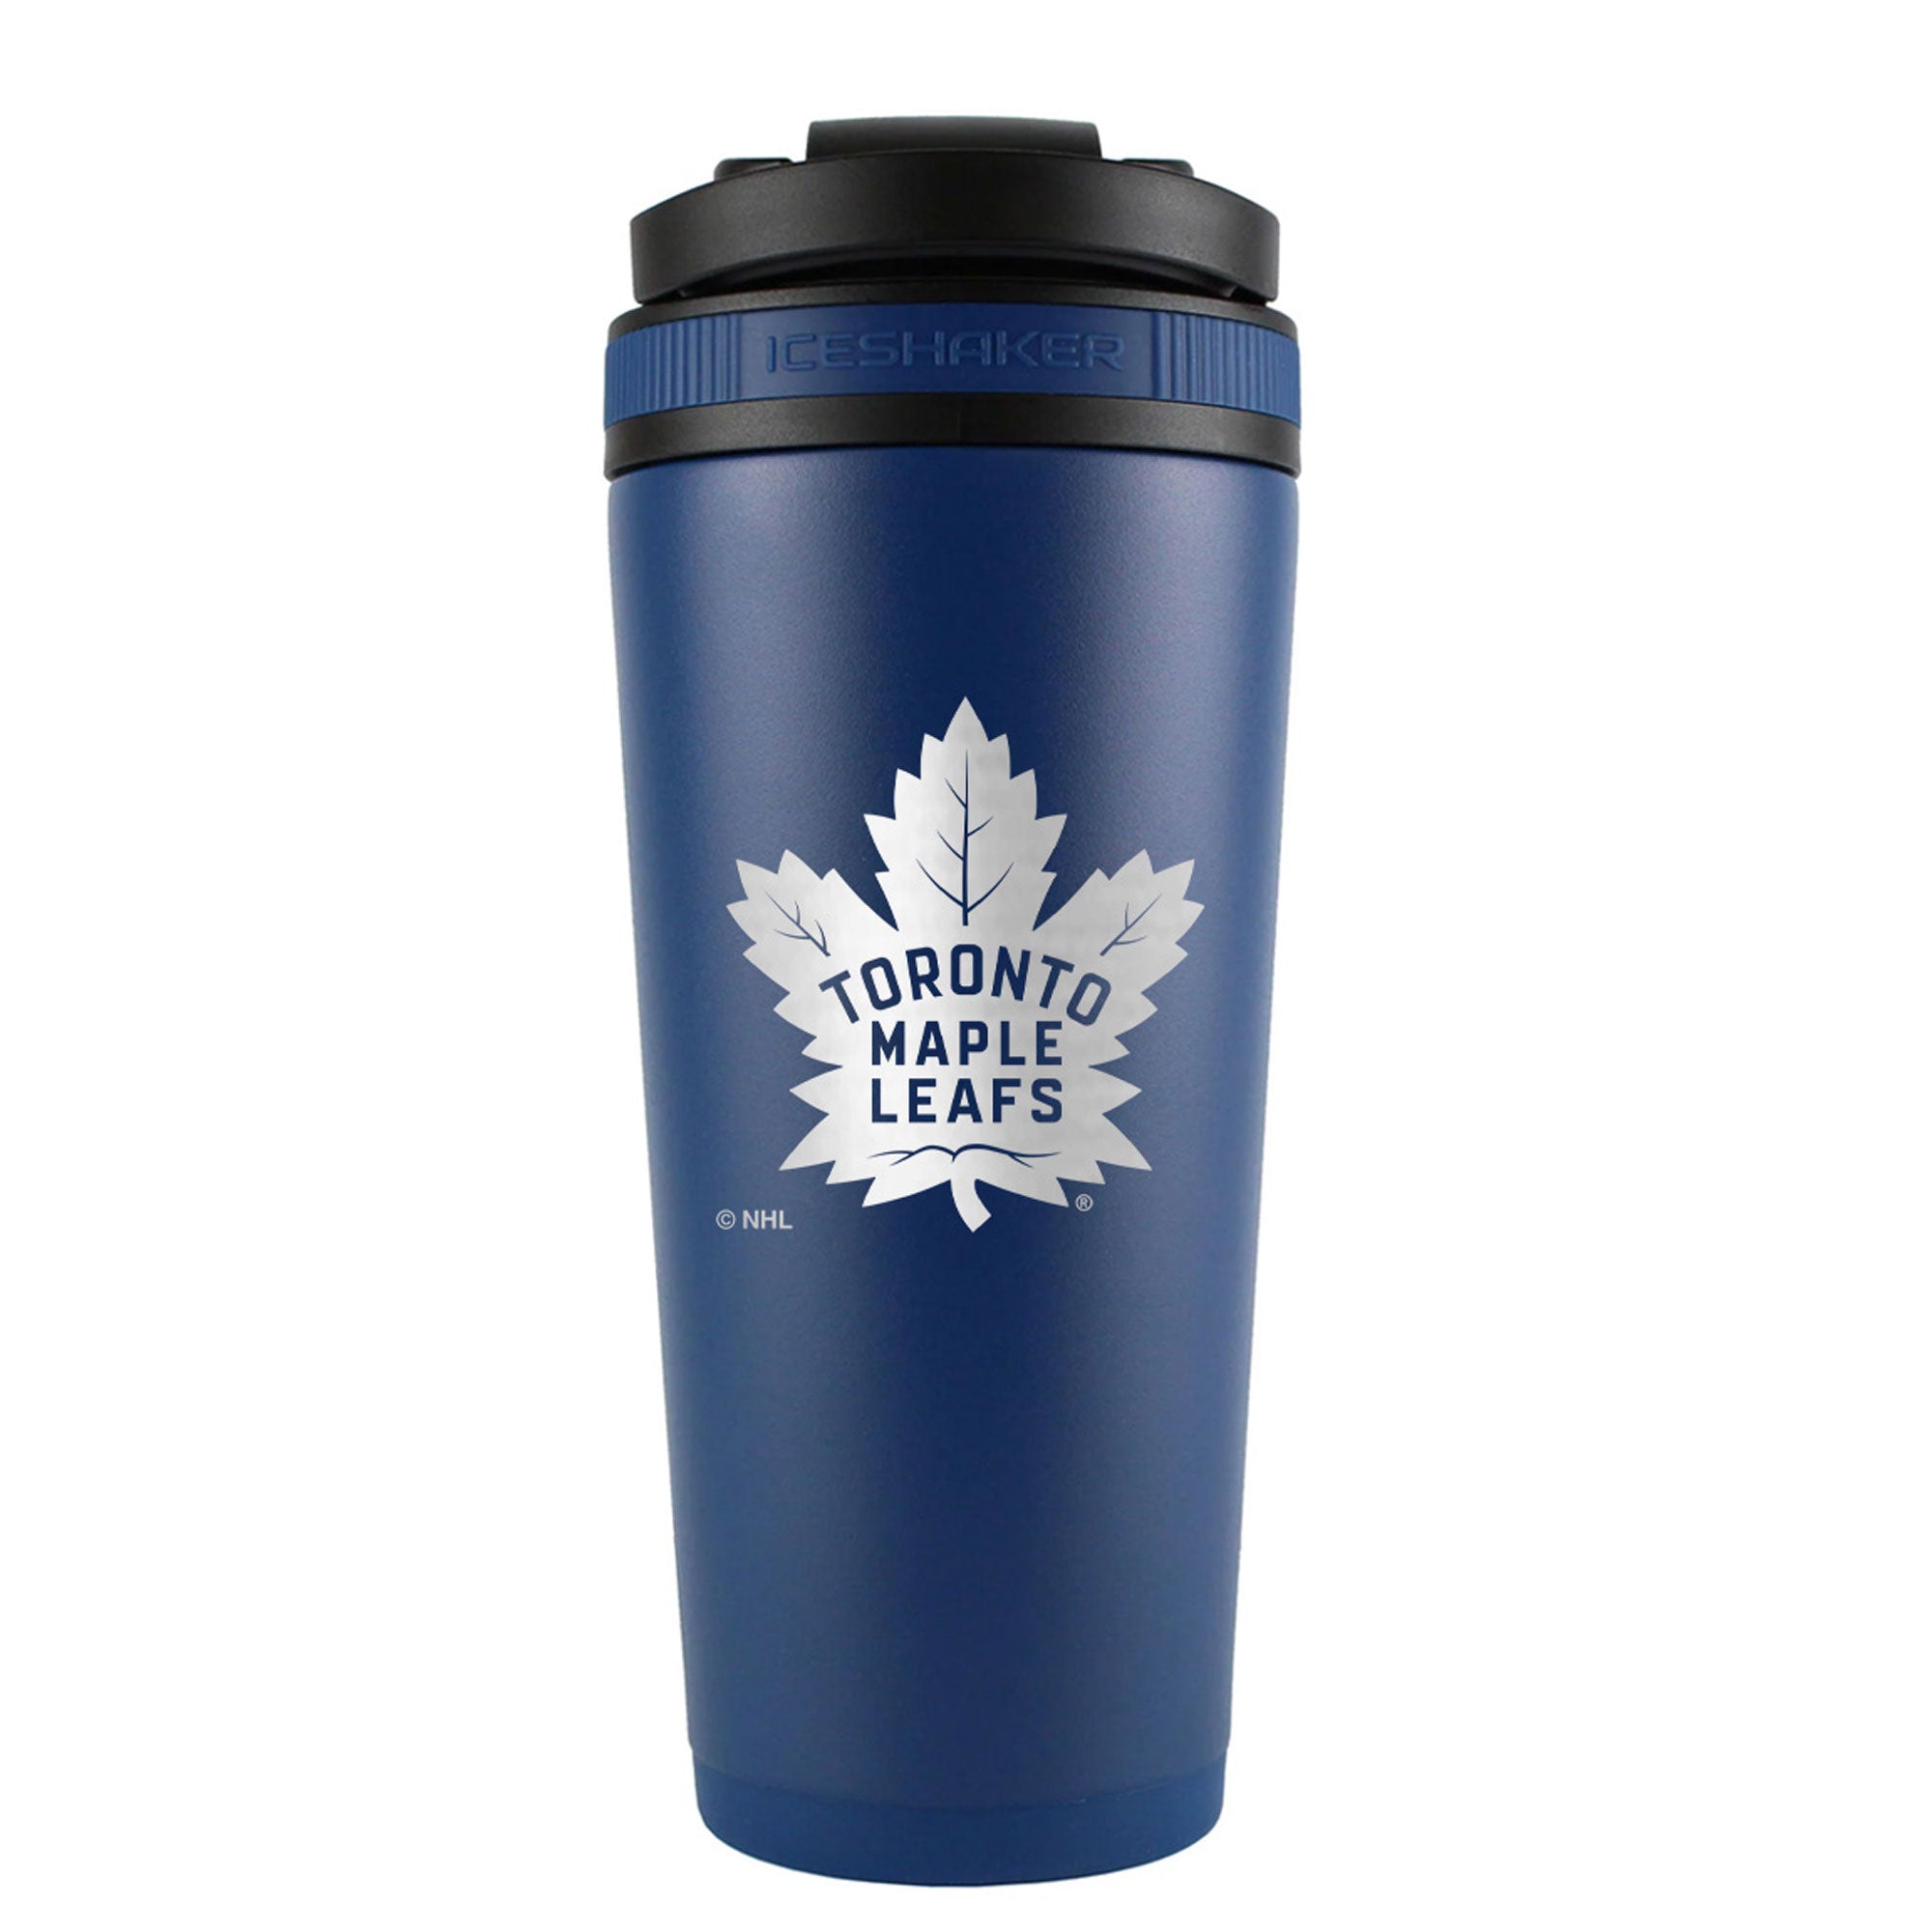 Officially Licensed Toronto Maple Leafs 26oz Ice Shaker - Navy